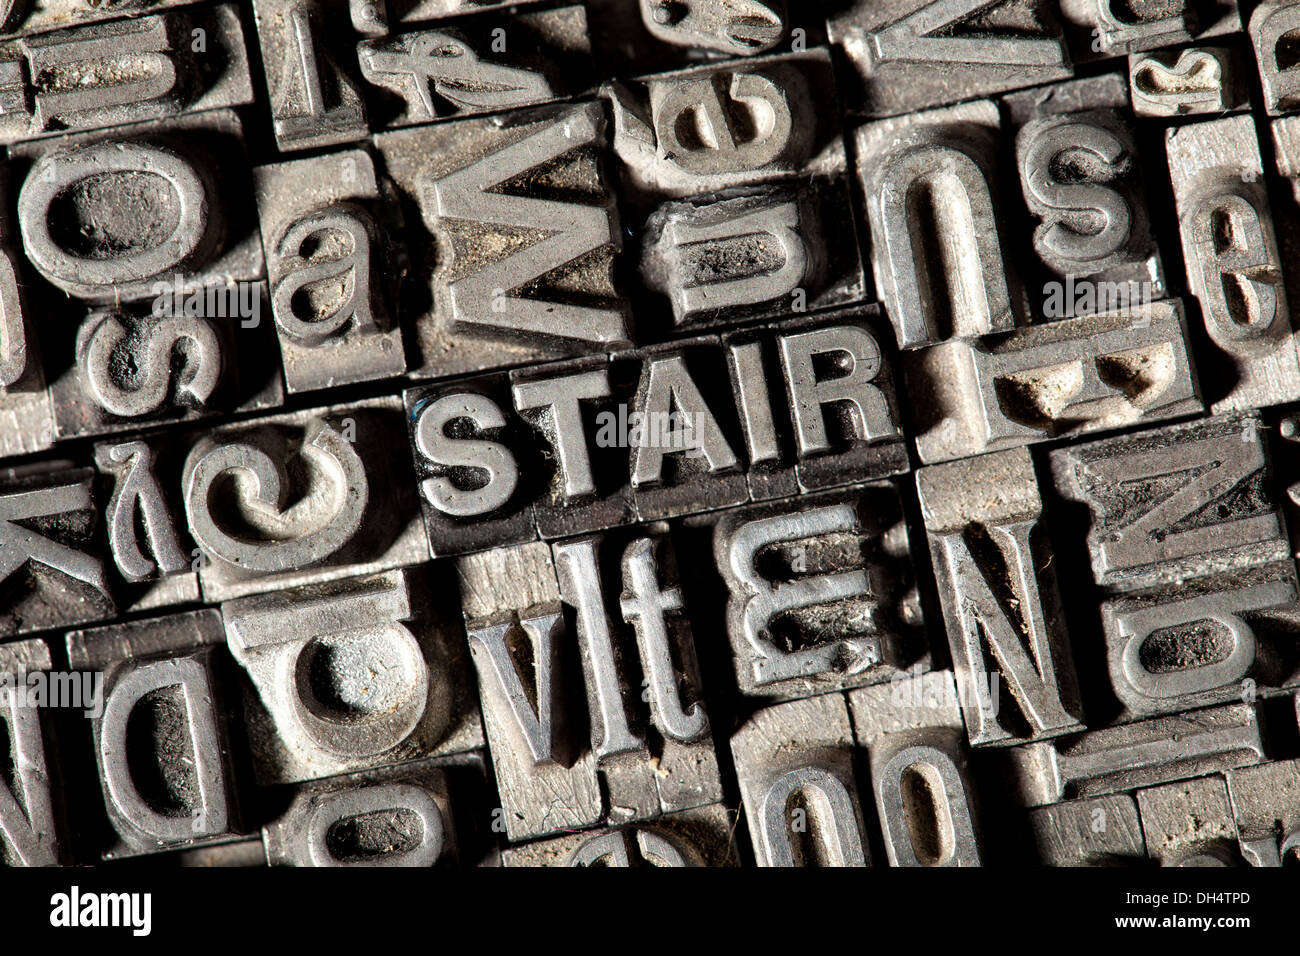 Old lead letters forming the word 'STAIR' Stock Photo